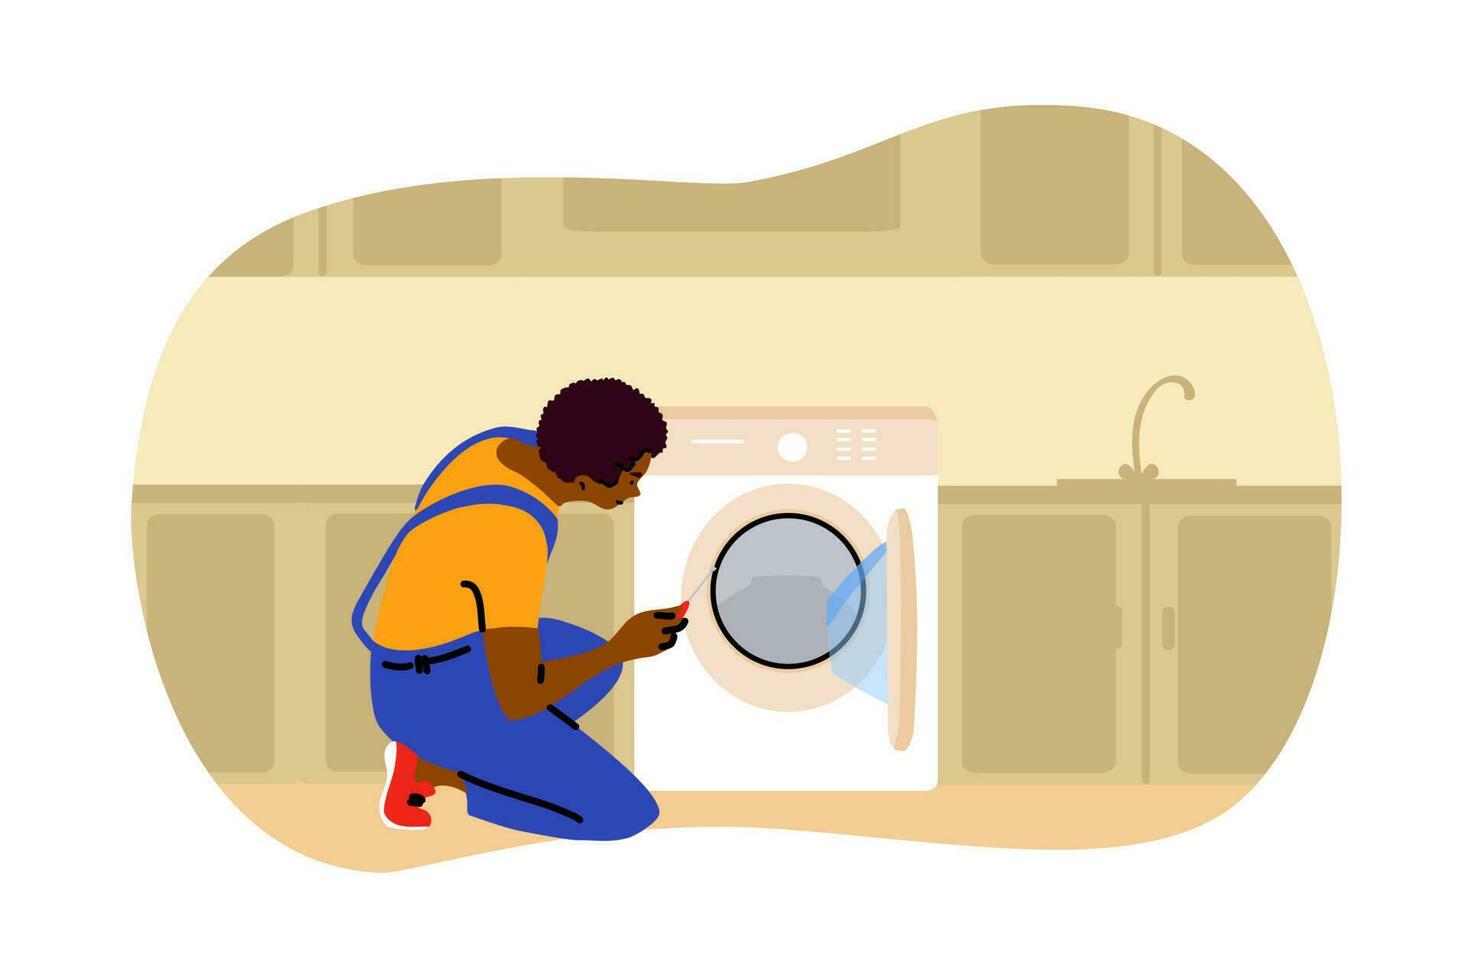 Repair, laundry, work, replacement concept. Young african american man plumber worker mechanic character repairing replacing washing machine at home. Domestic tools equipment maintenance illustration. vector